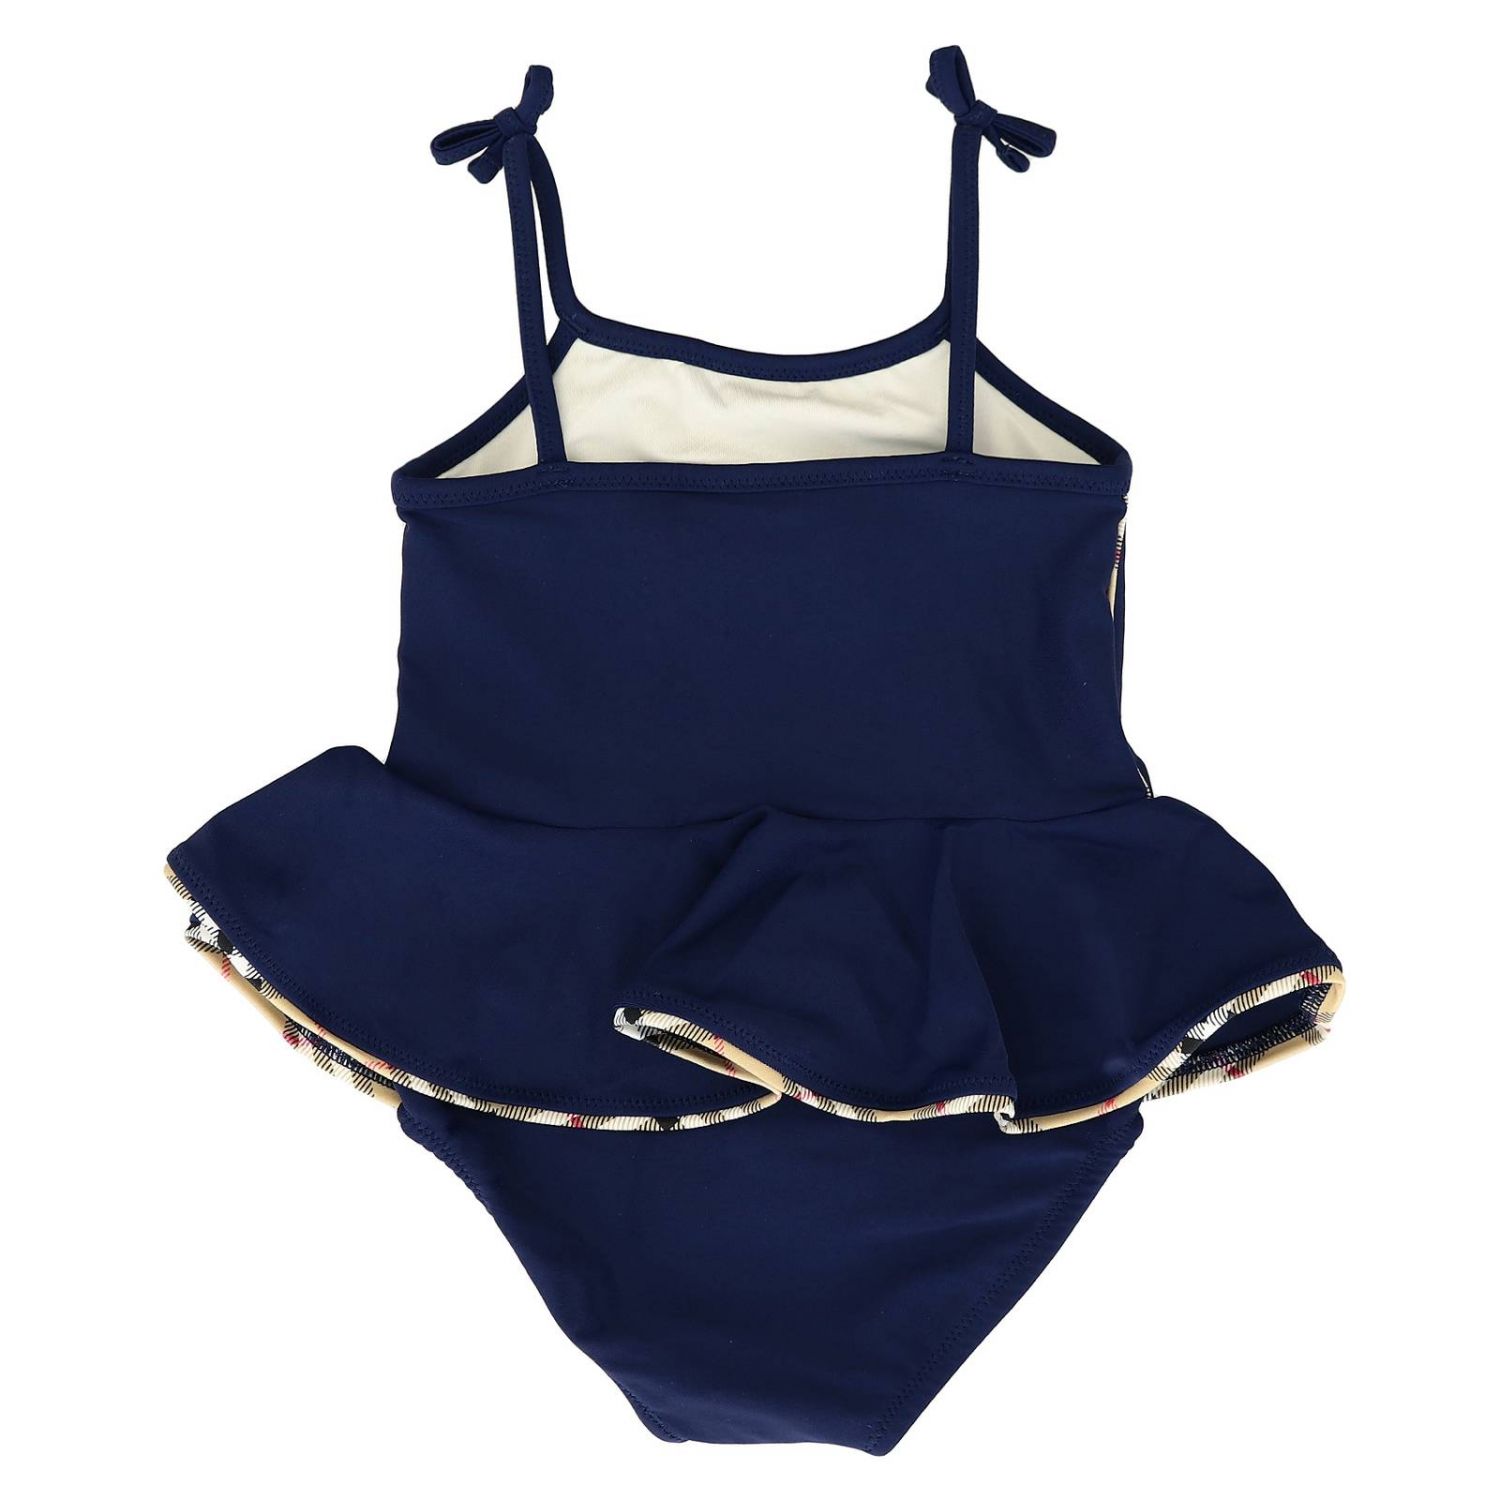 Burberry Infant Outlet: Swimsuit kids | Swimsuit Burberry Infant Kids ...